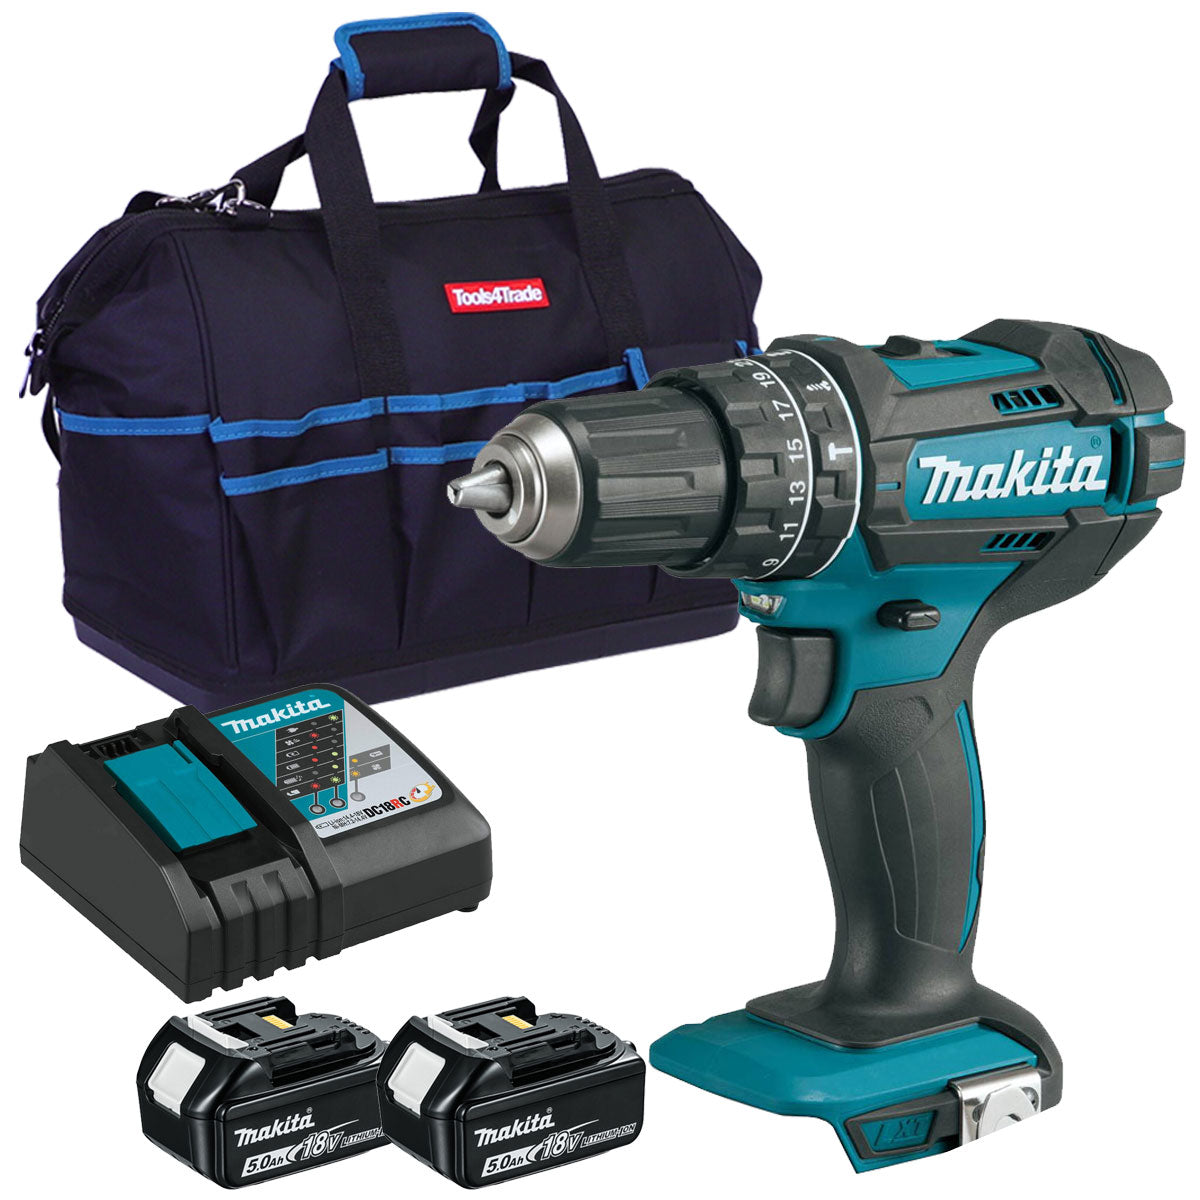 Makita DHP482Z 18V Combi Drill with 2 x 5.0Ah Battery Charger & Tool Bag